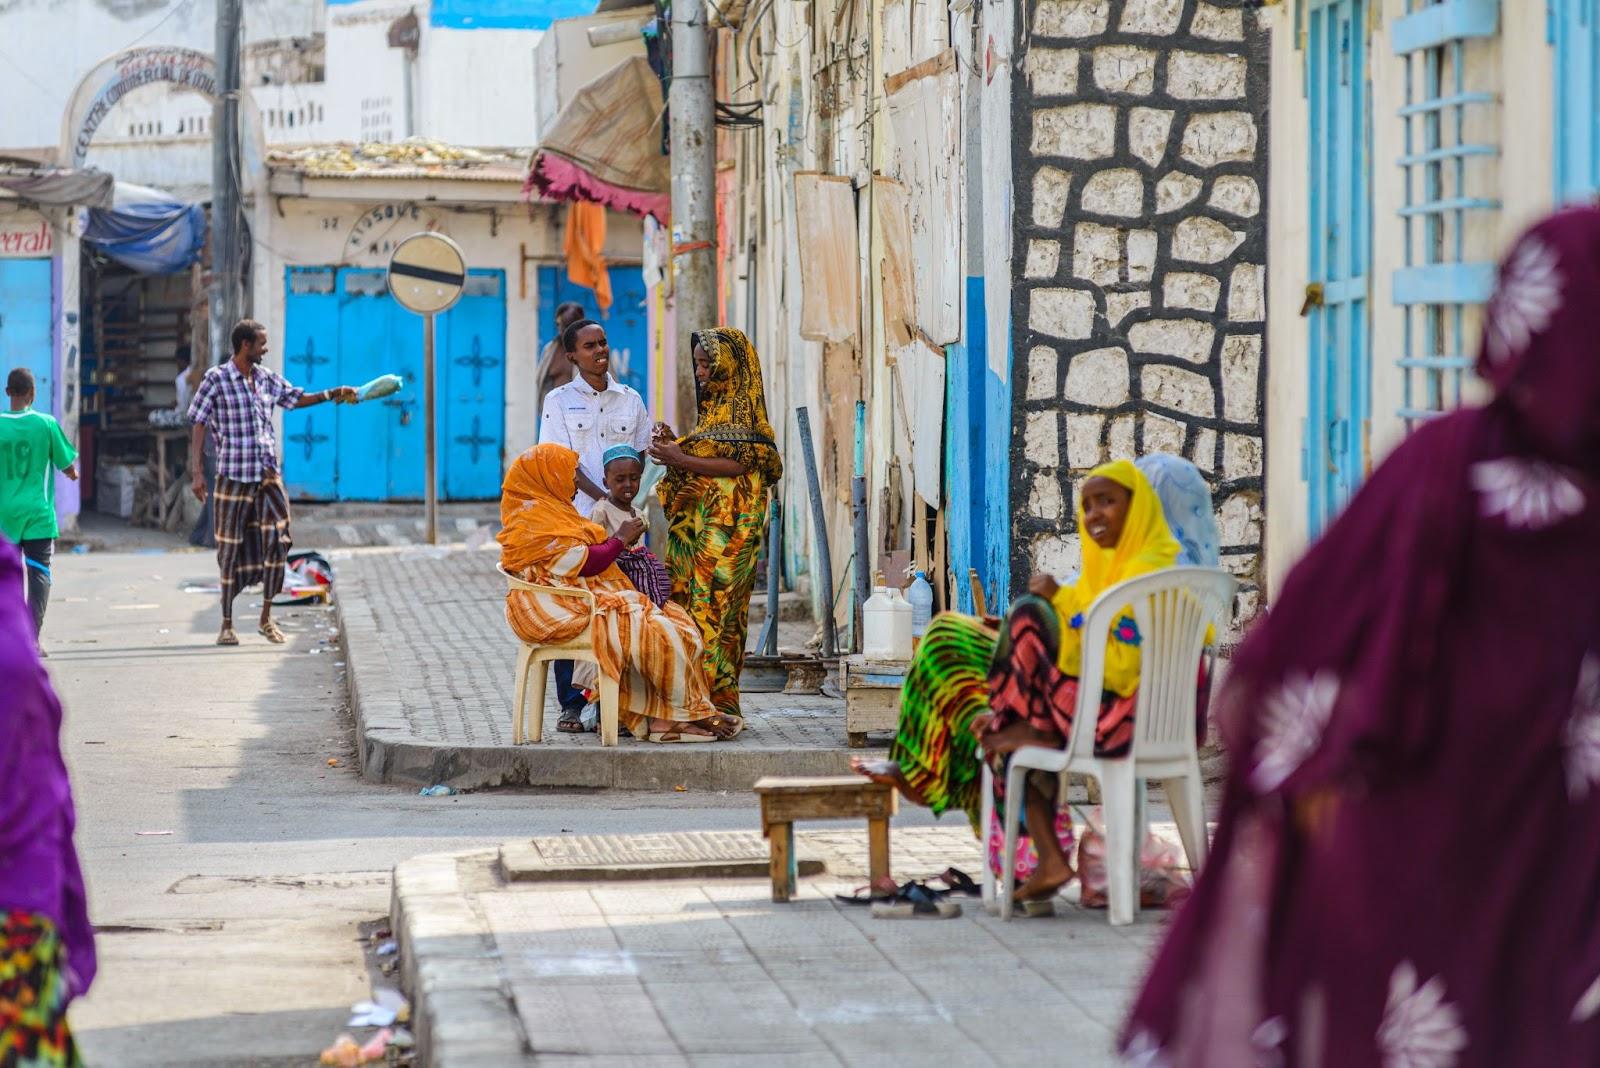 Locals on a street in downtown Djibouti.